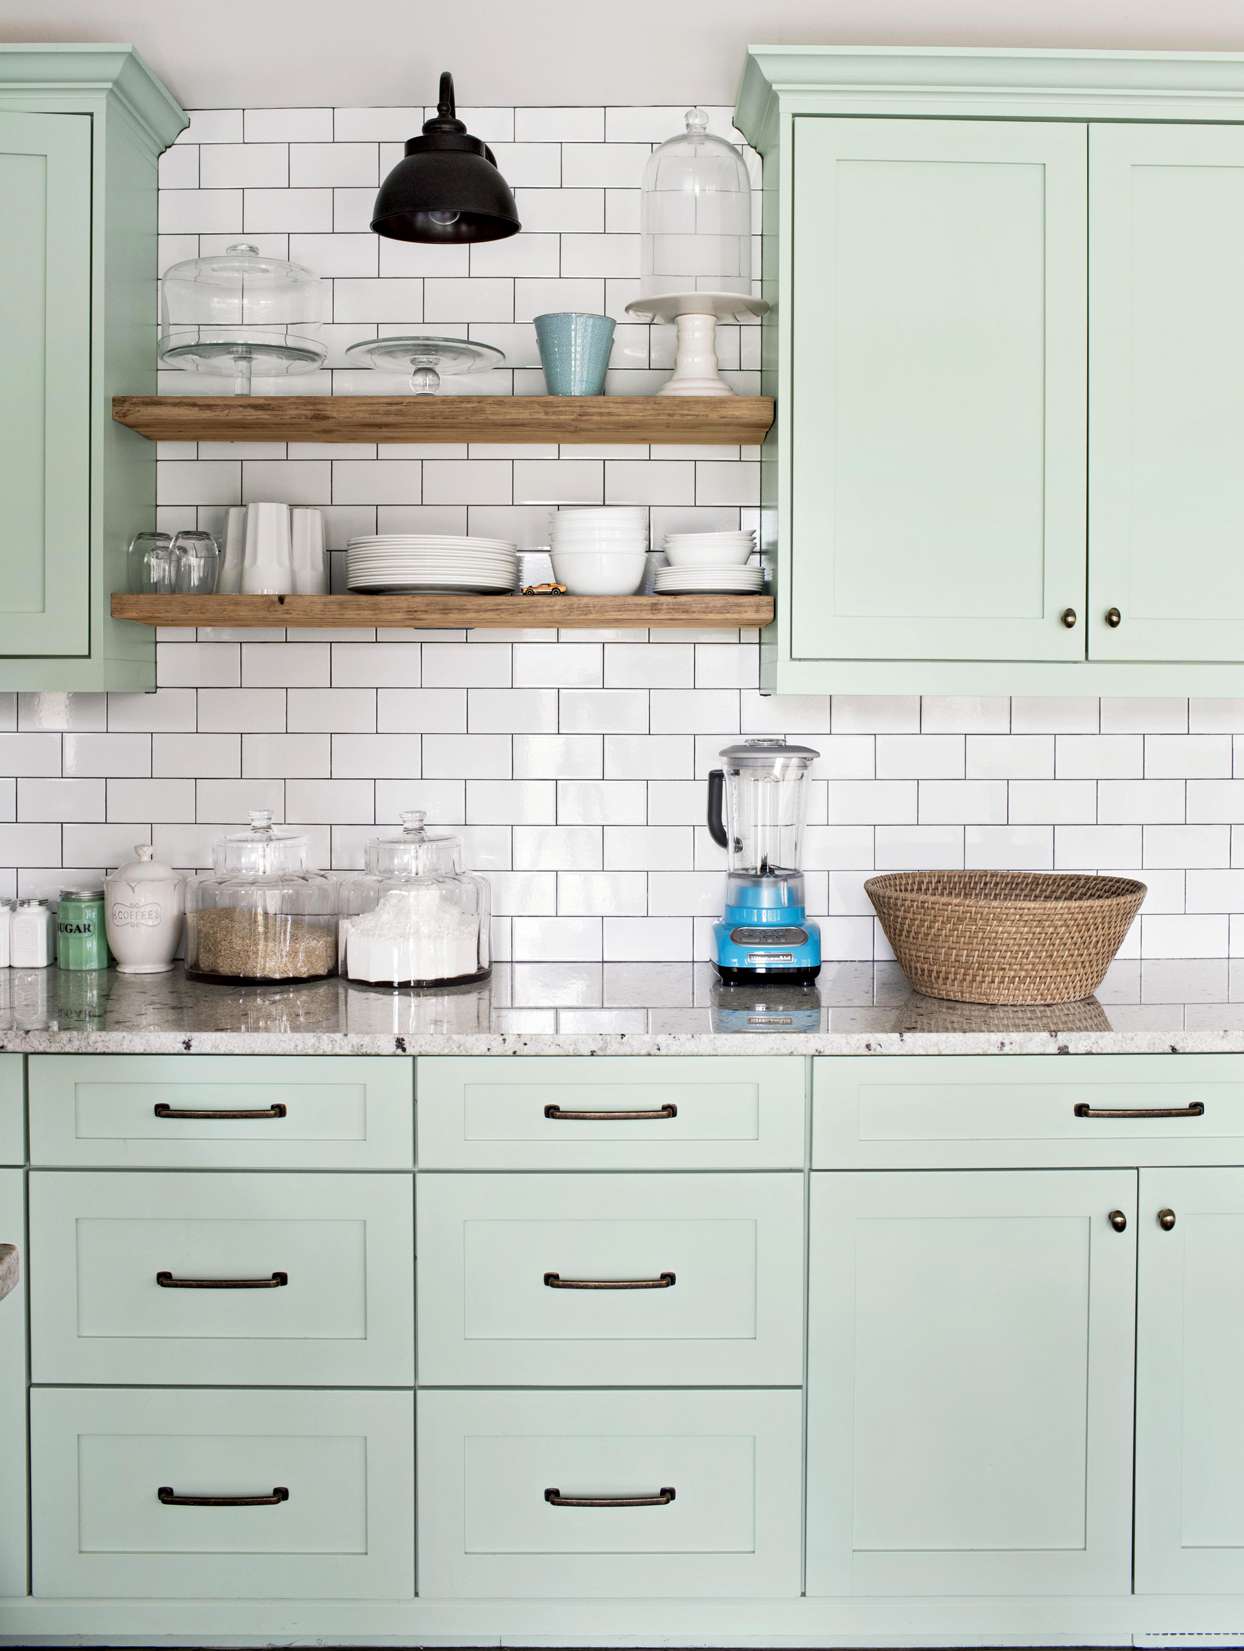 19 Popular Kitchen Cabinet Colors With, Most Popular Colors To Paint Your Kitchen Cabinets